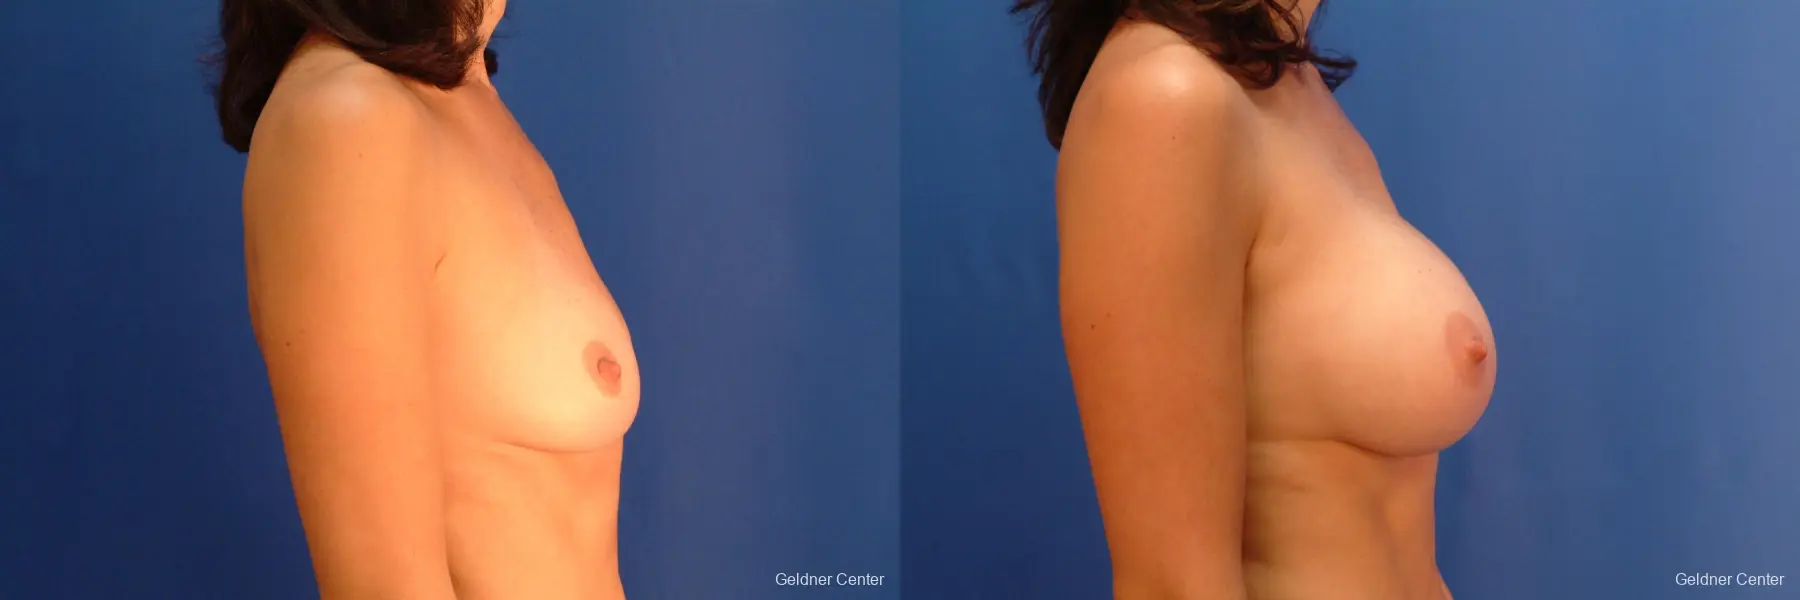 Breast Augmentation Streeterville, Chicago 2437 - Before and After 2